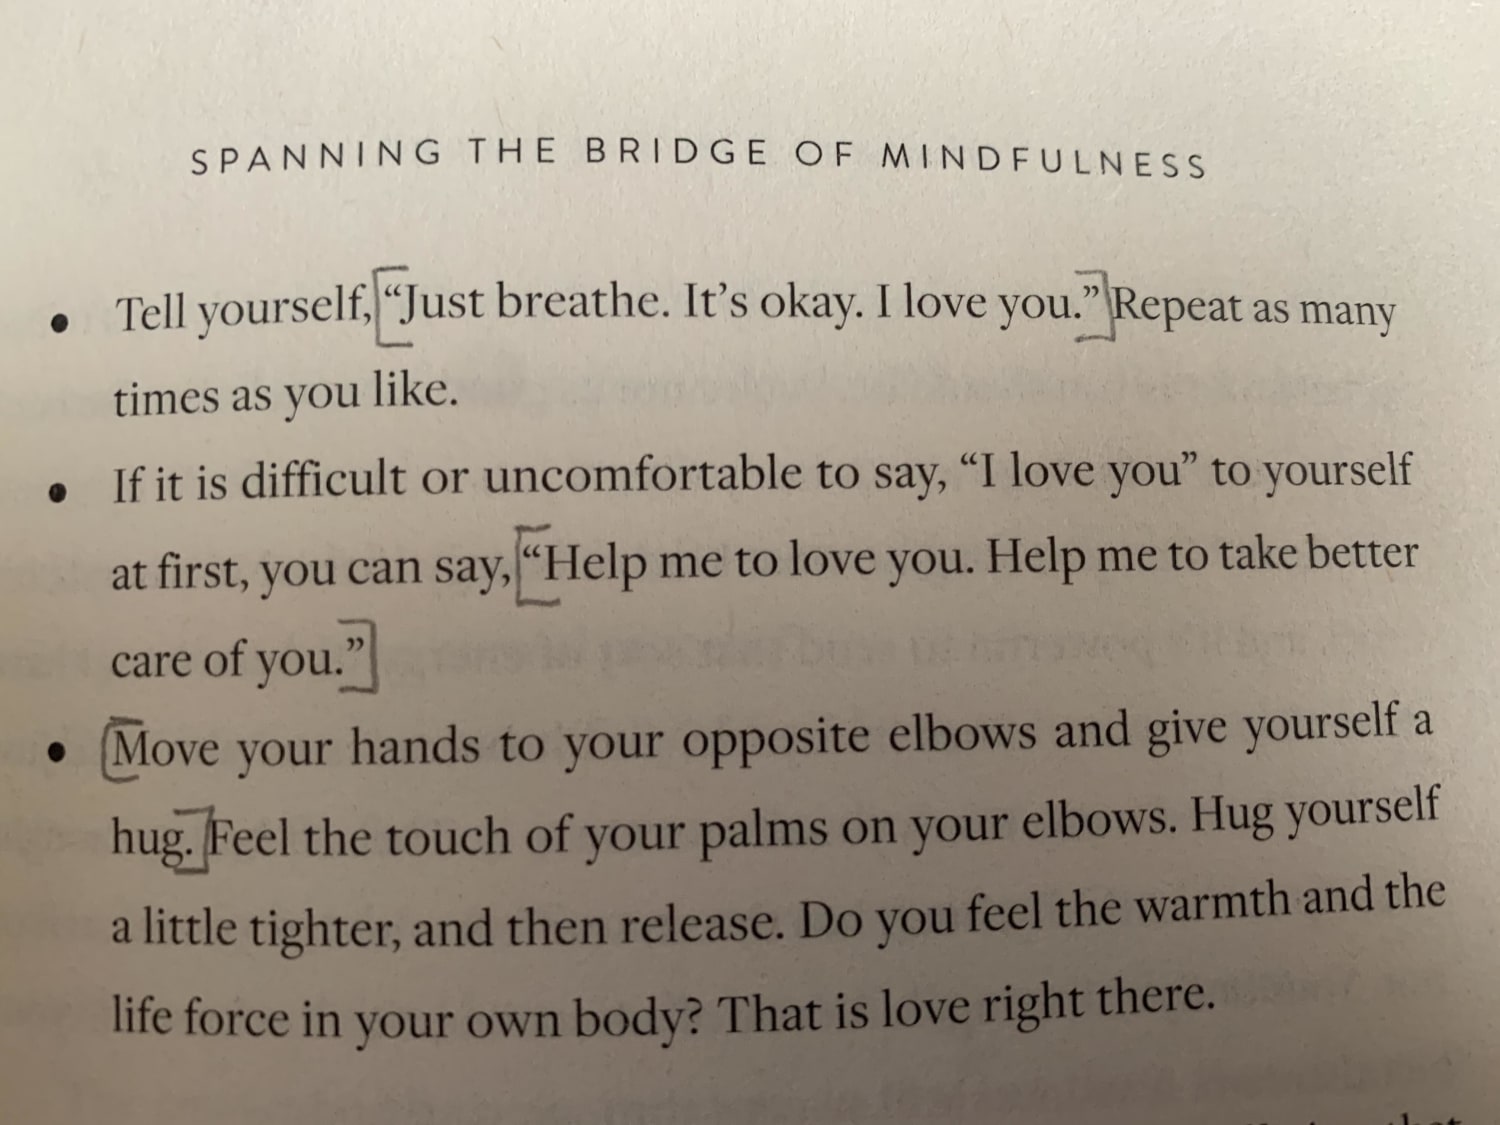 How to practice loving-kindness.